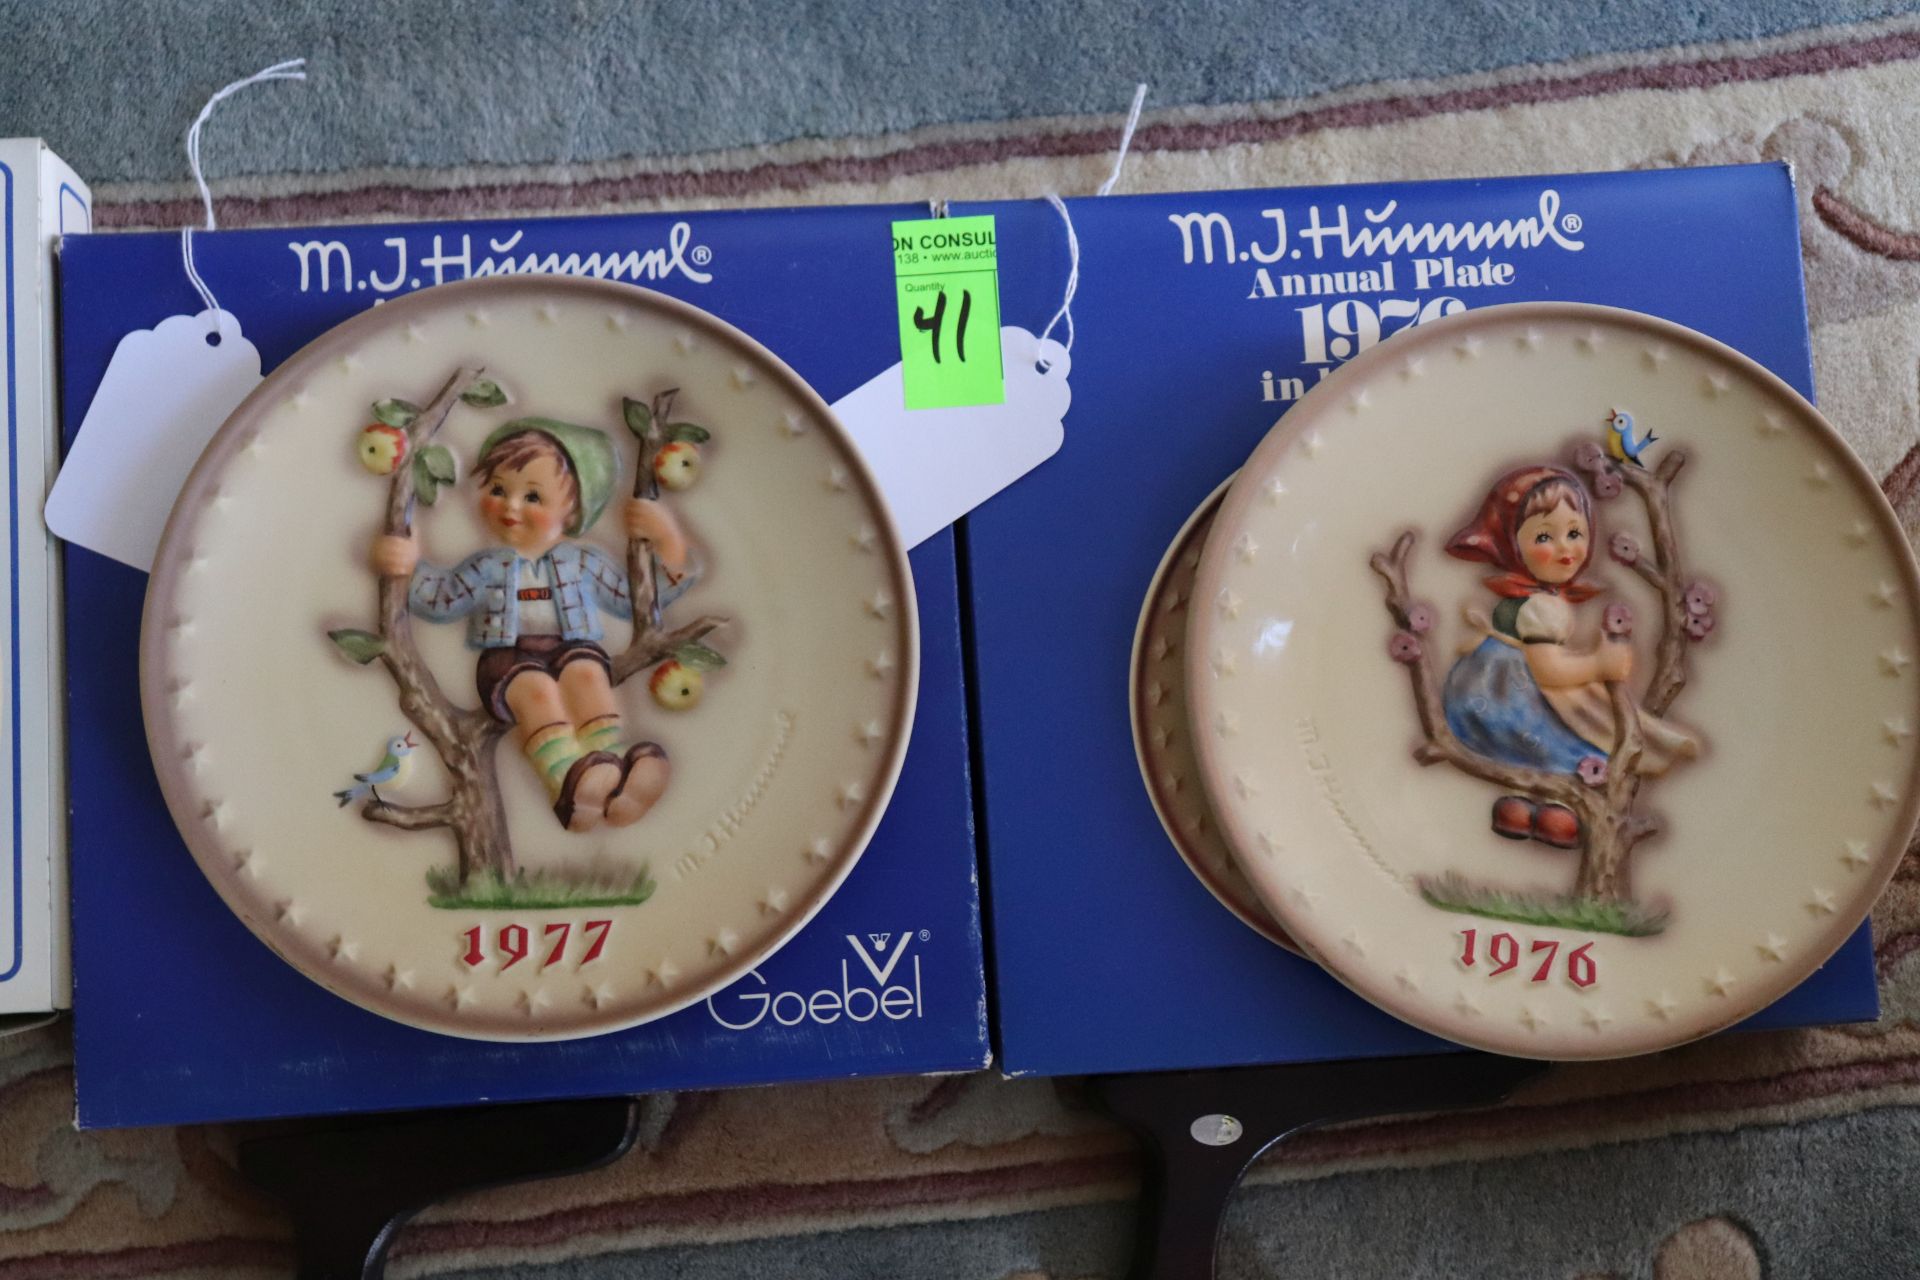 Two Hummel collectible plates, 1976 and 1977